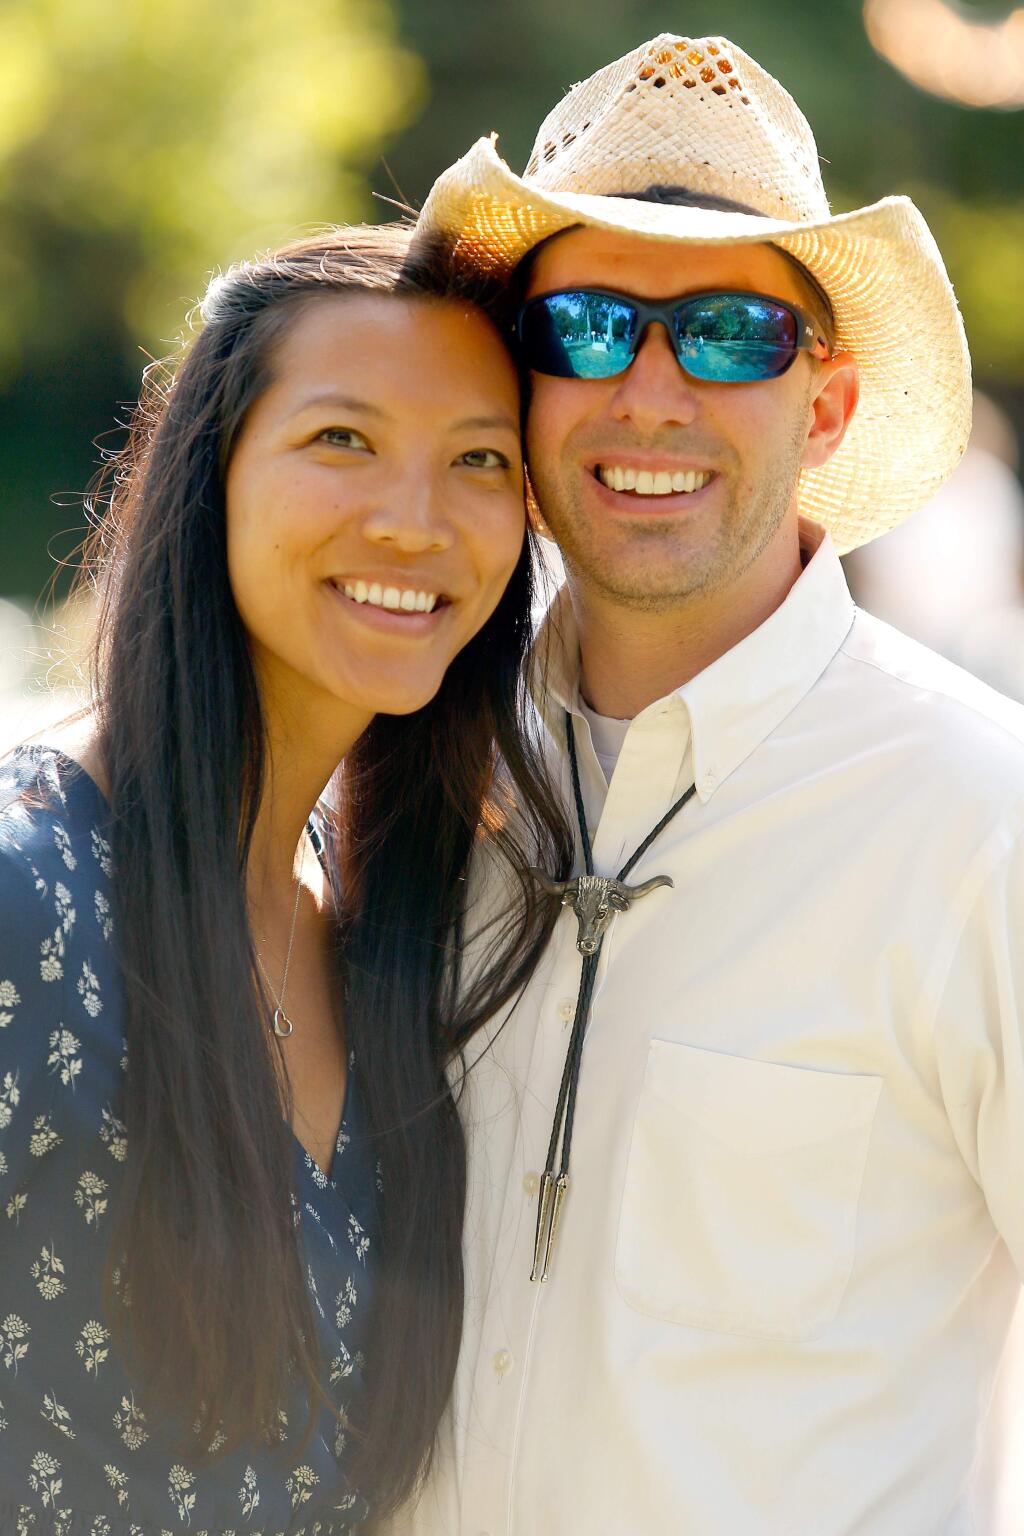 Allison Wong and Mark Flowers attend Love of the Land hosted by the Sonoma County Farm Bureau, at Richard's Grove and Saralee's Vineyard, in Windsor, California, on Thursday, July 12, 2018. (Alvin Jornada / The Press Democrat)